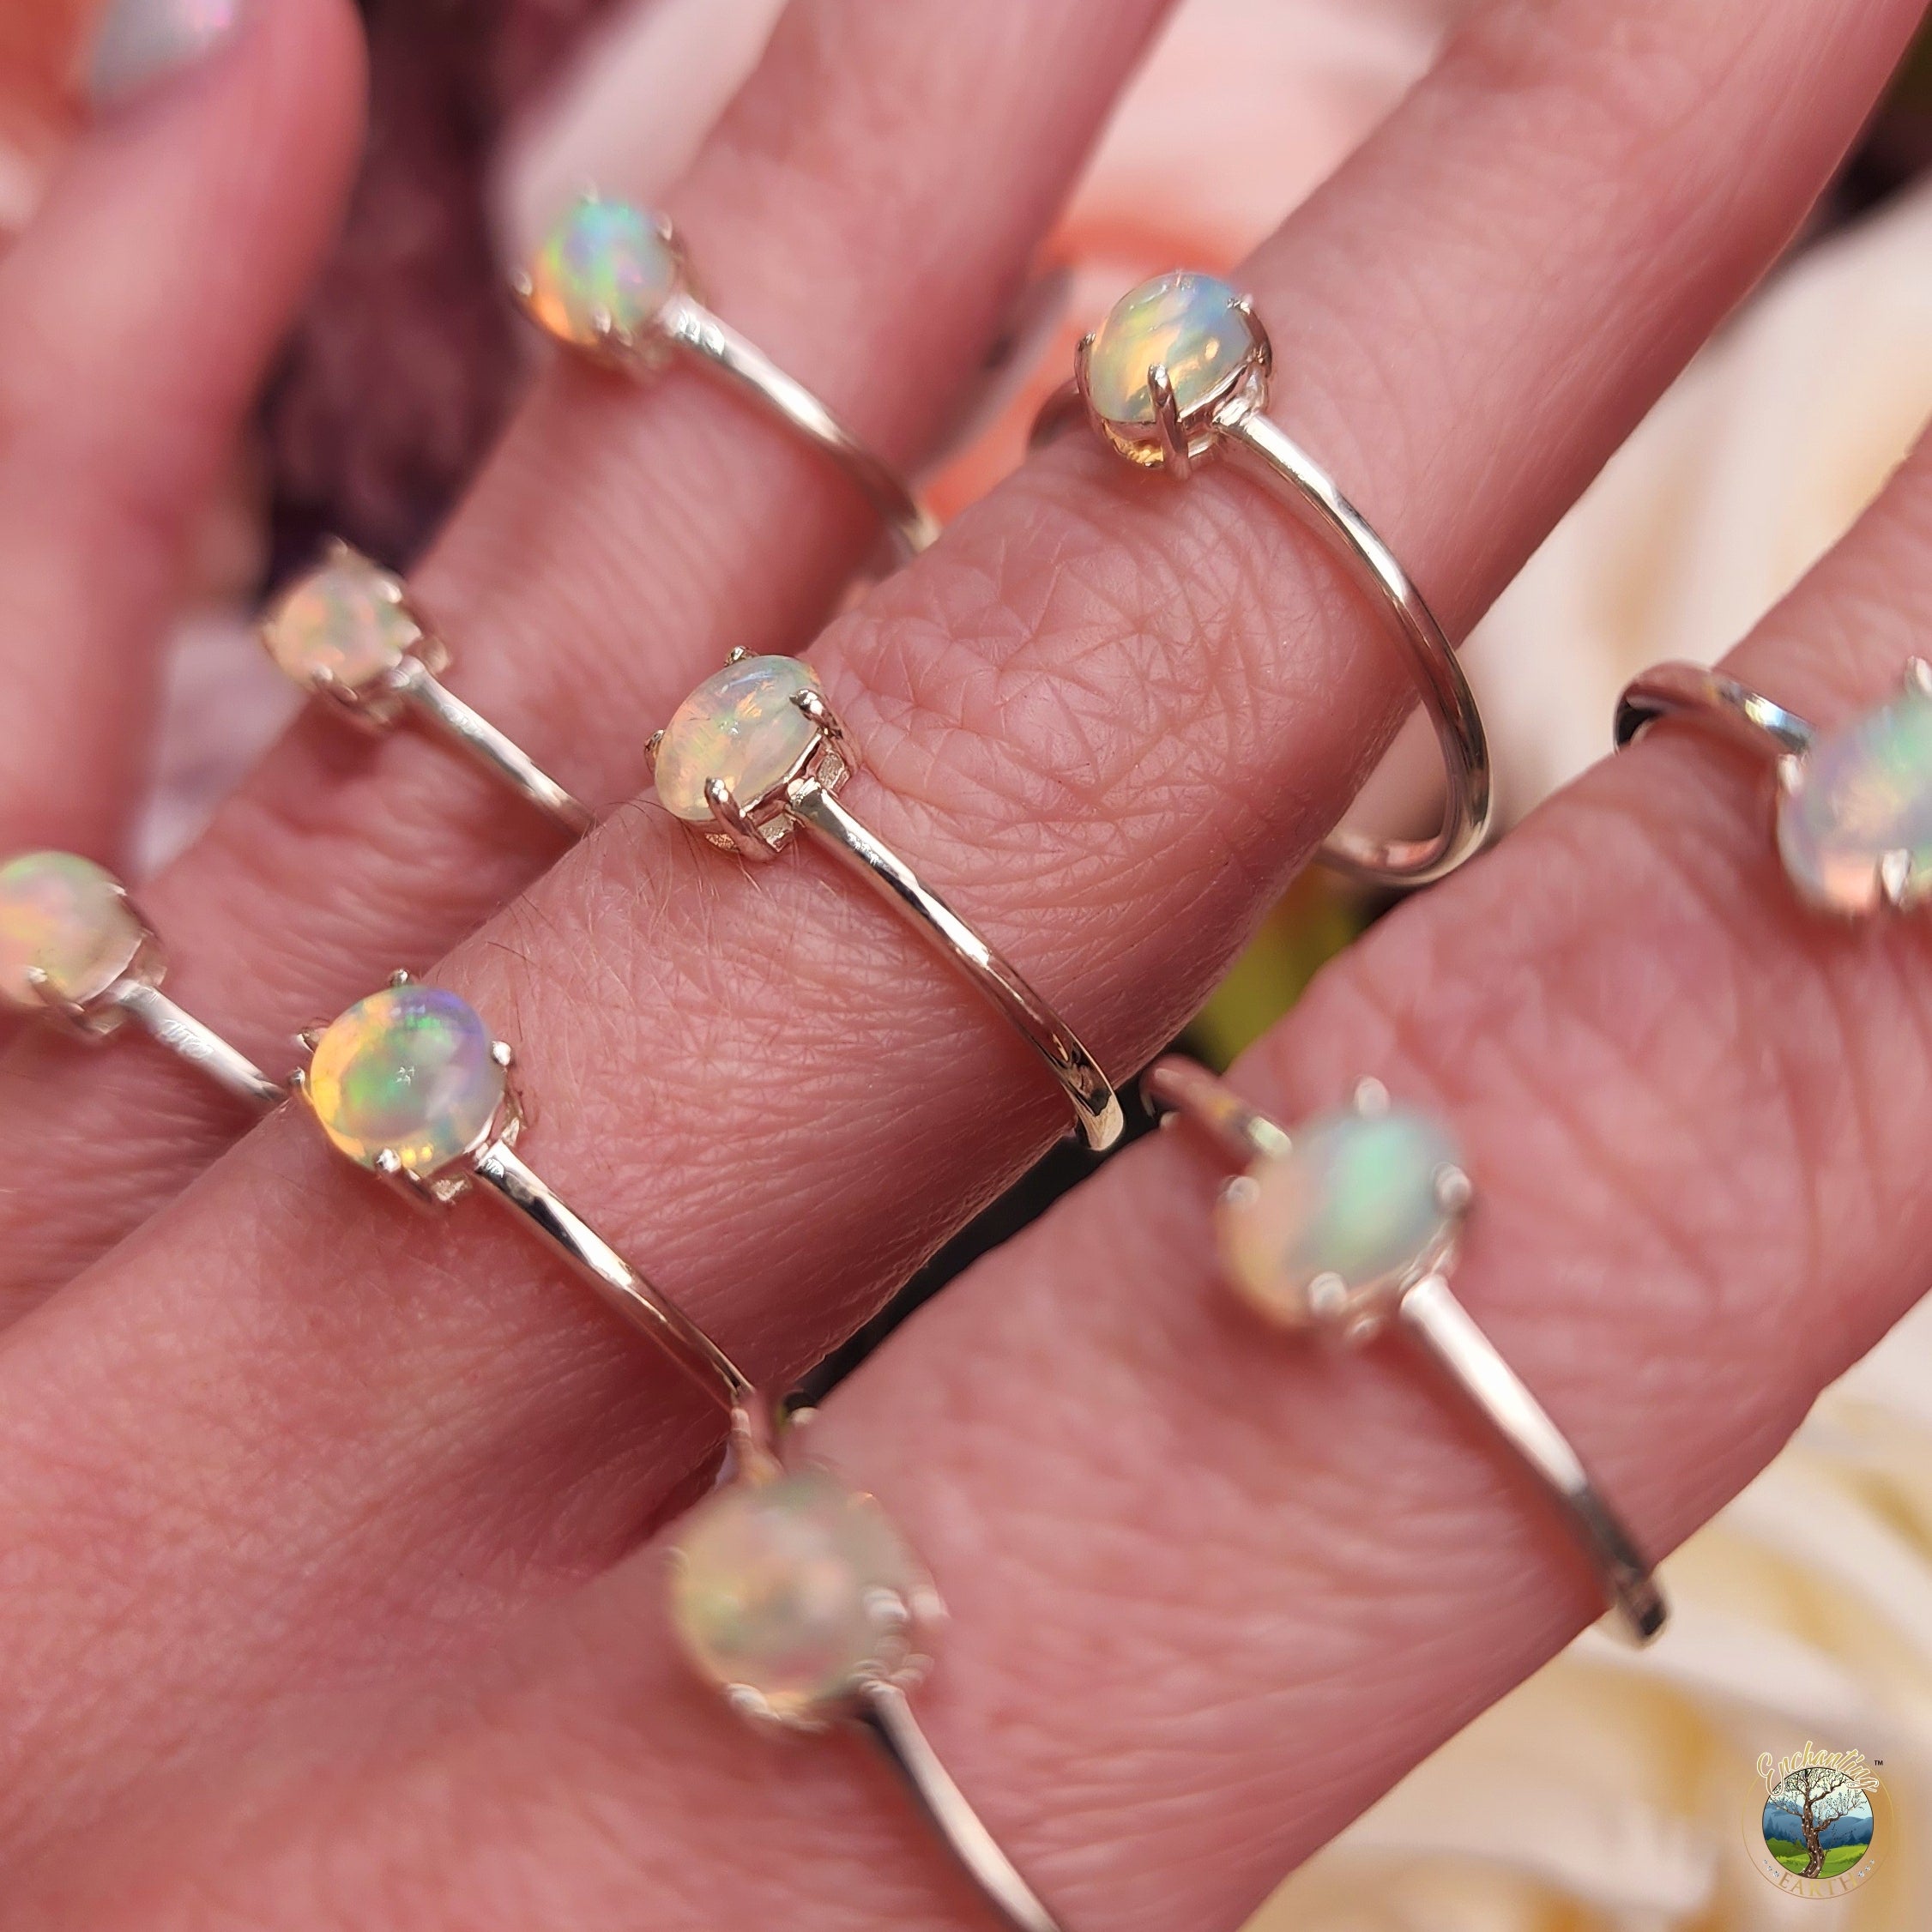 Ethiopian Opal Dainty Ring with Prong .925 Silver for Creativity, Joy and Pursuing your Dreams